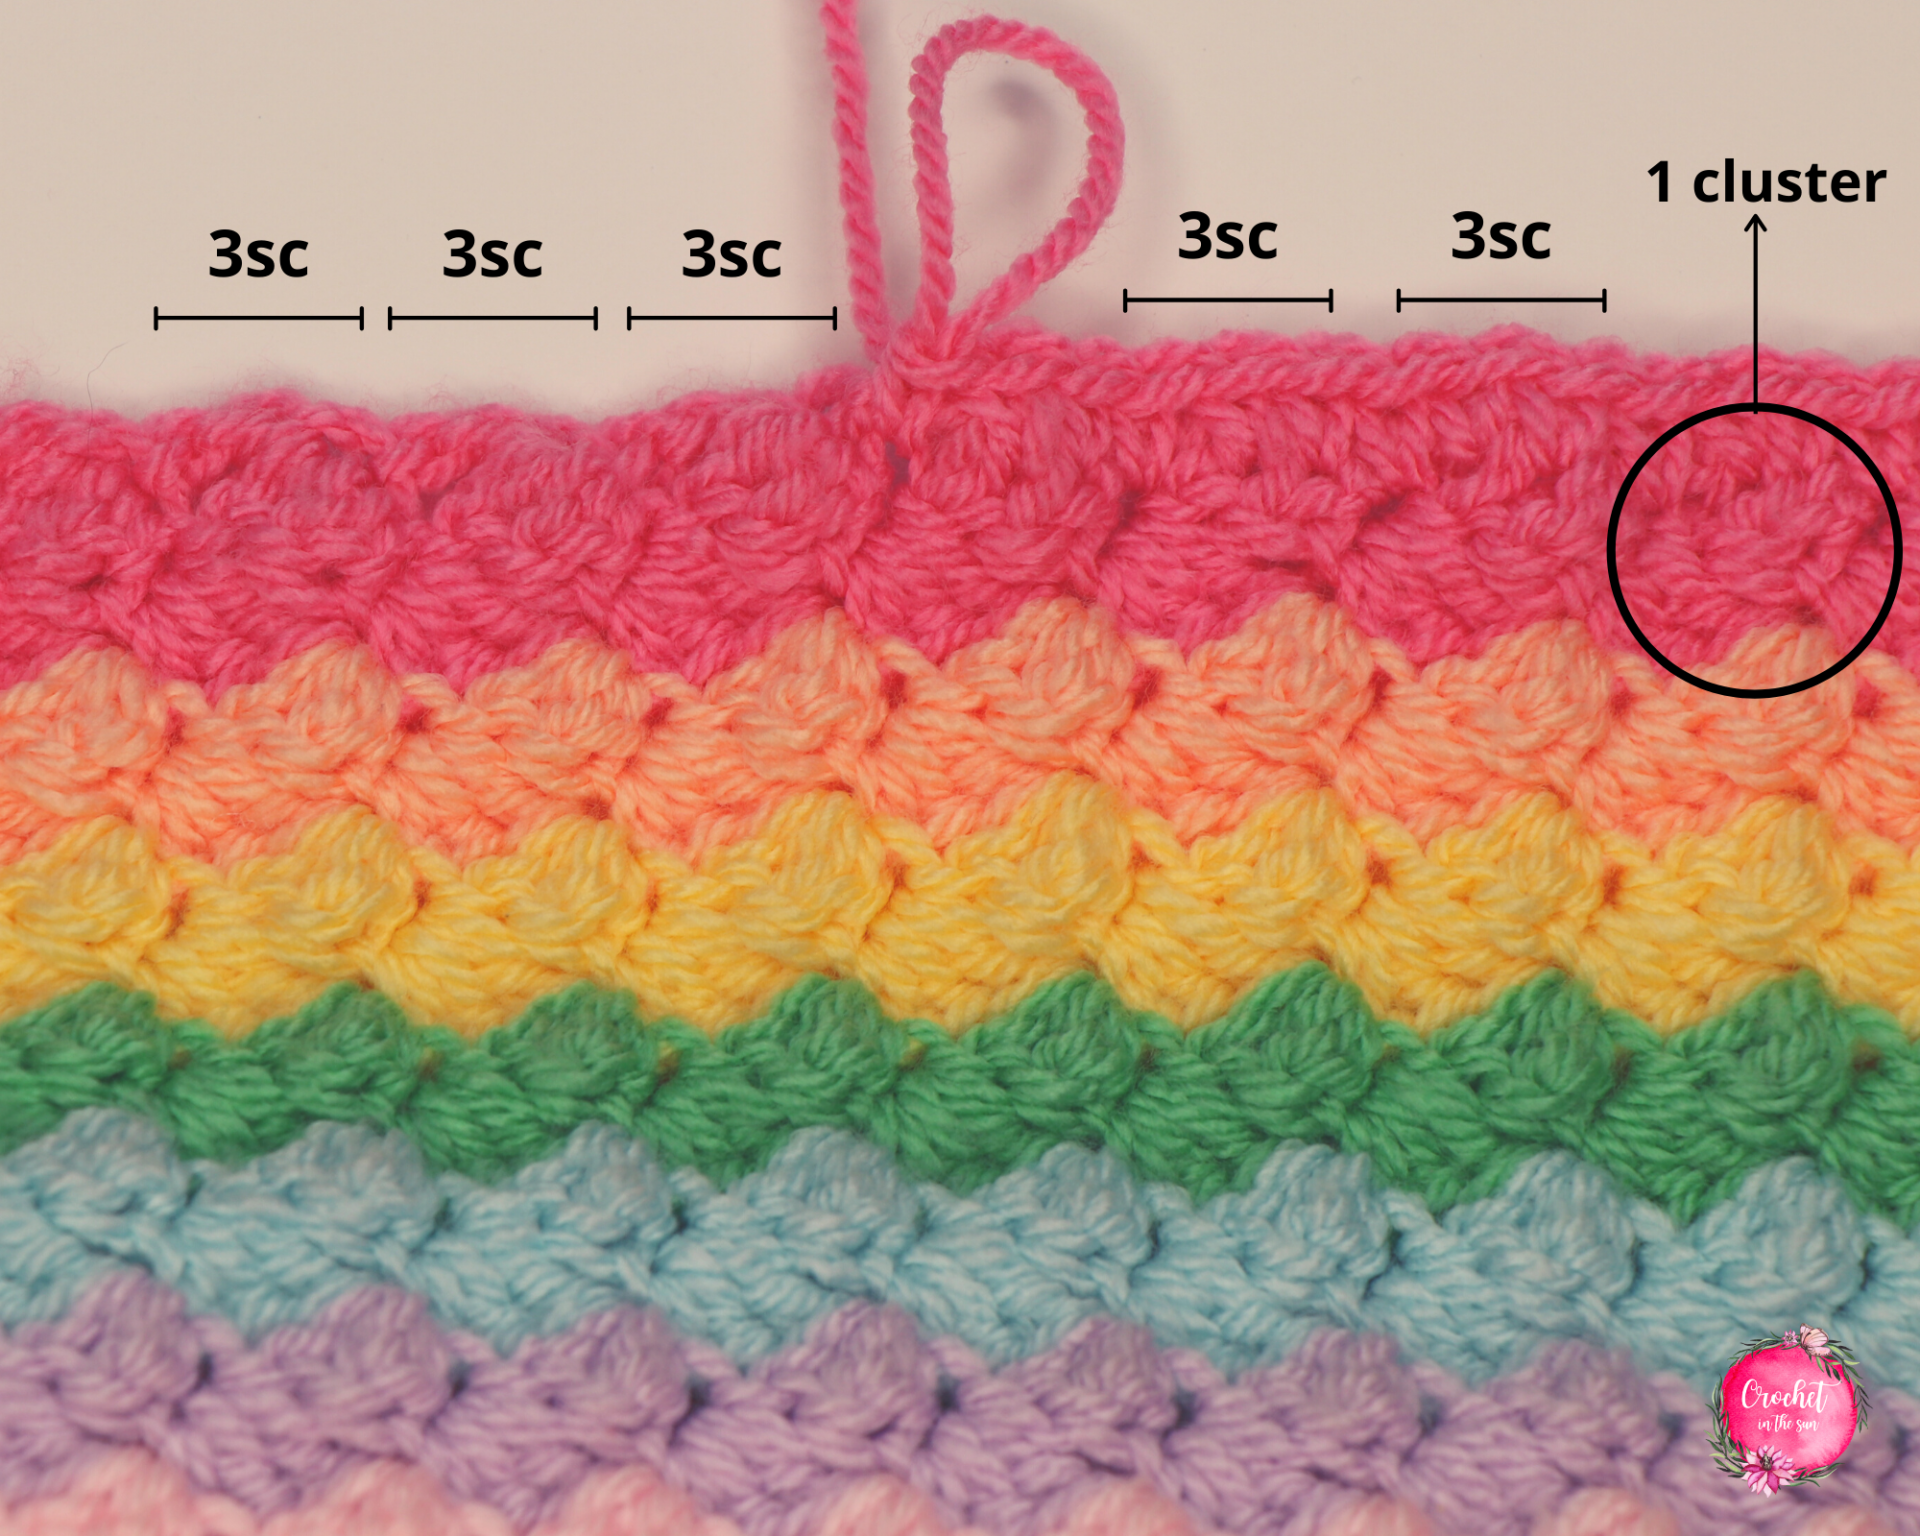 Free and easy crochet rainbow blanket pattern. This shows the details of the border. This crochet project is great for beginners, and work up to be a beautiful blanket with a great texture